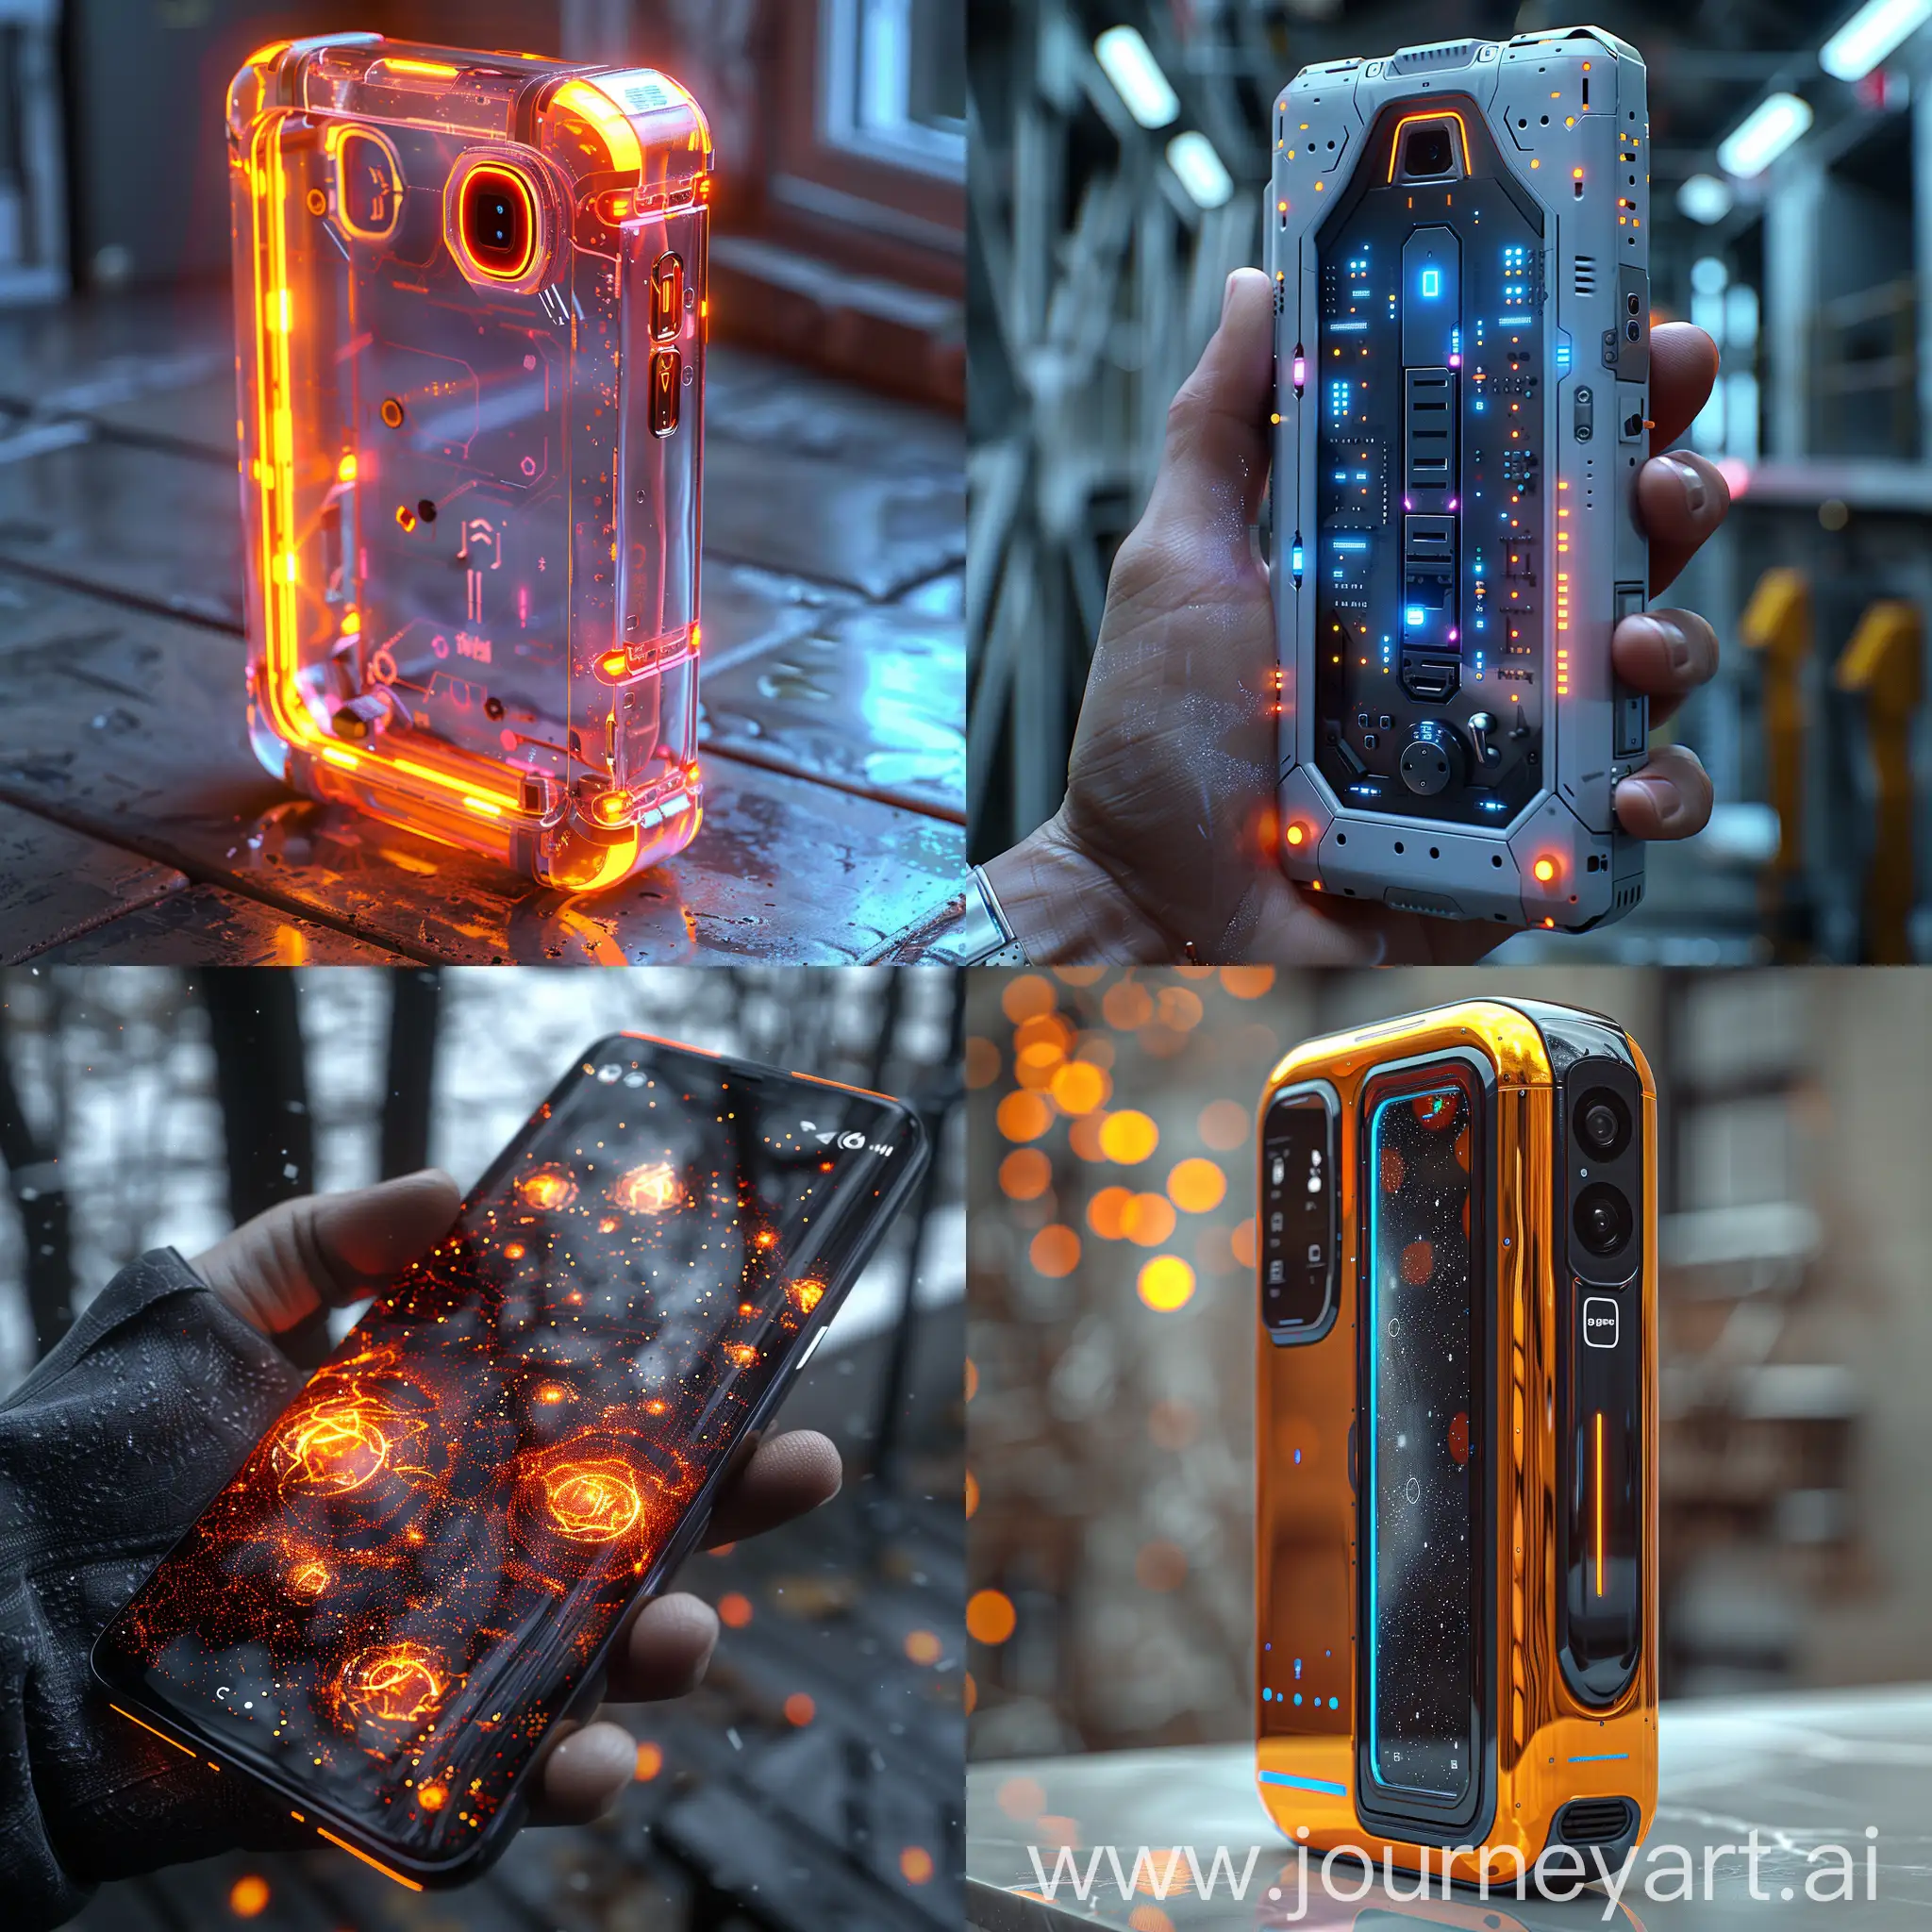 Futuristic-Smartphone-with-Octane-Render-in-Raw-Style